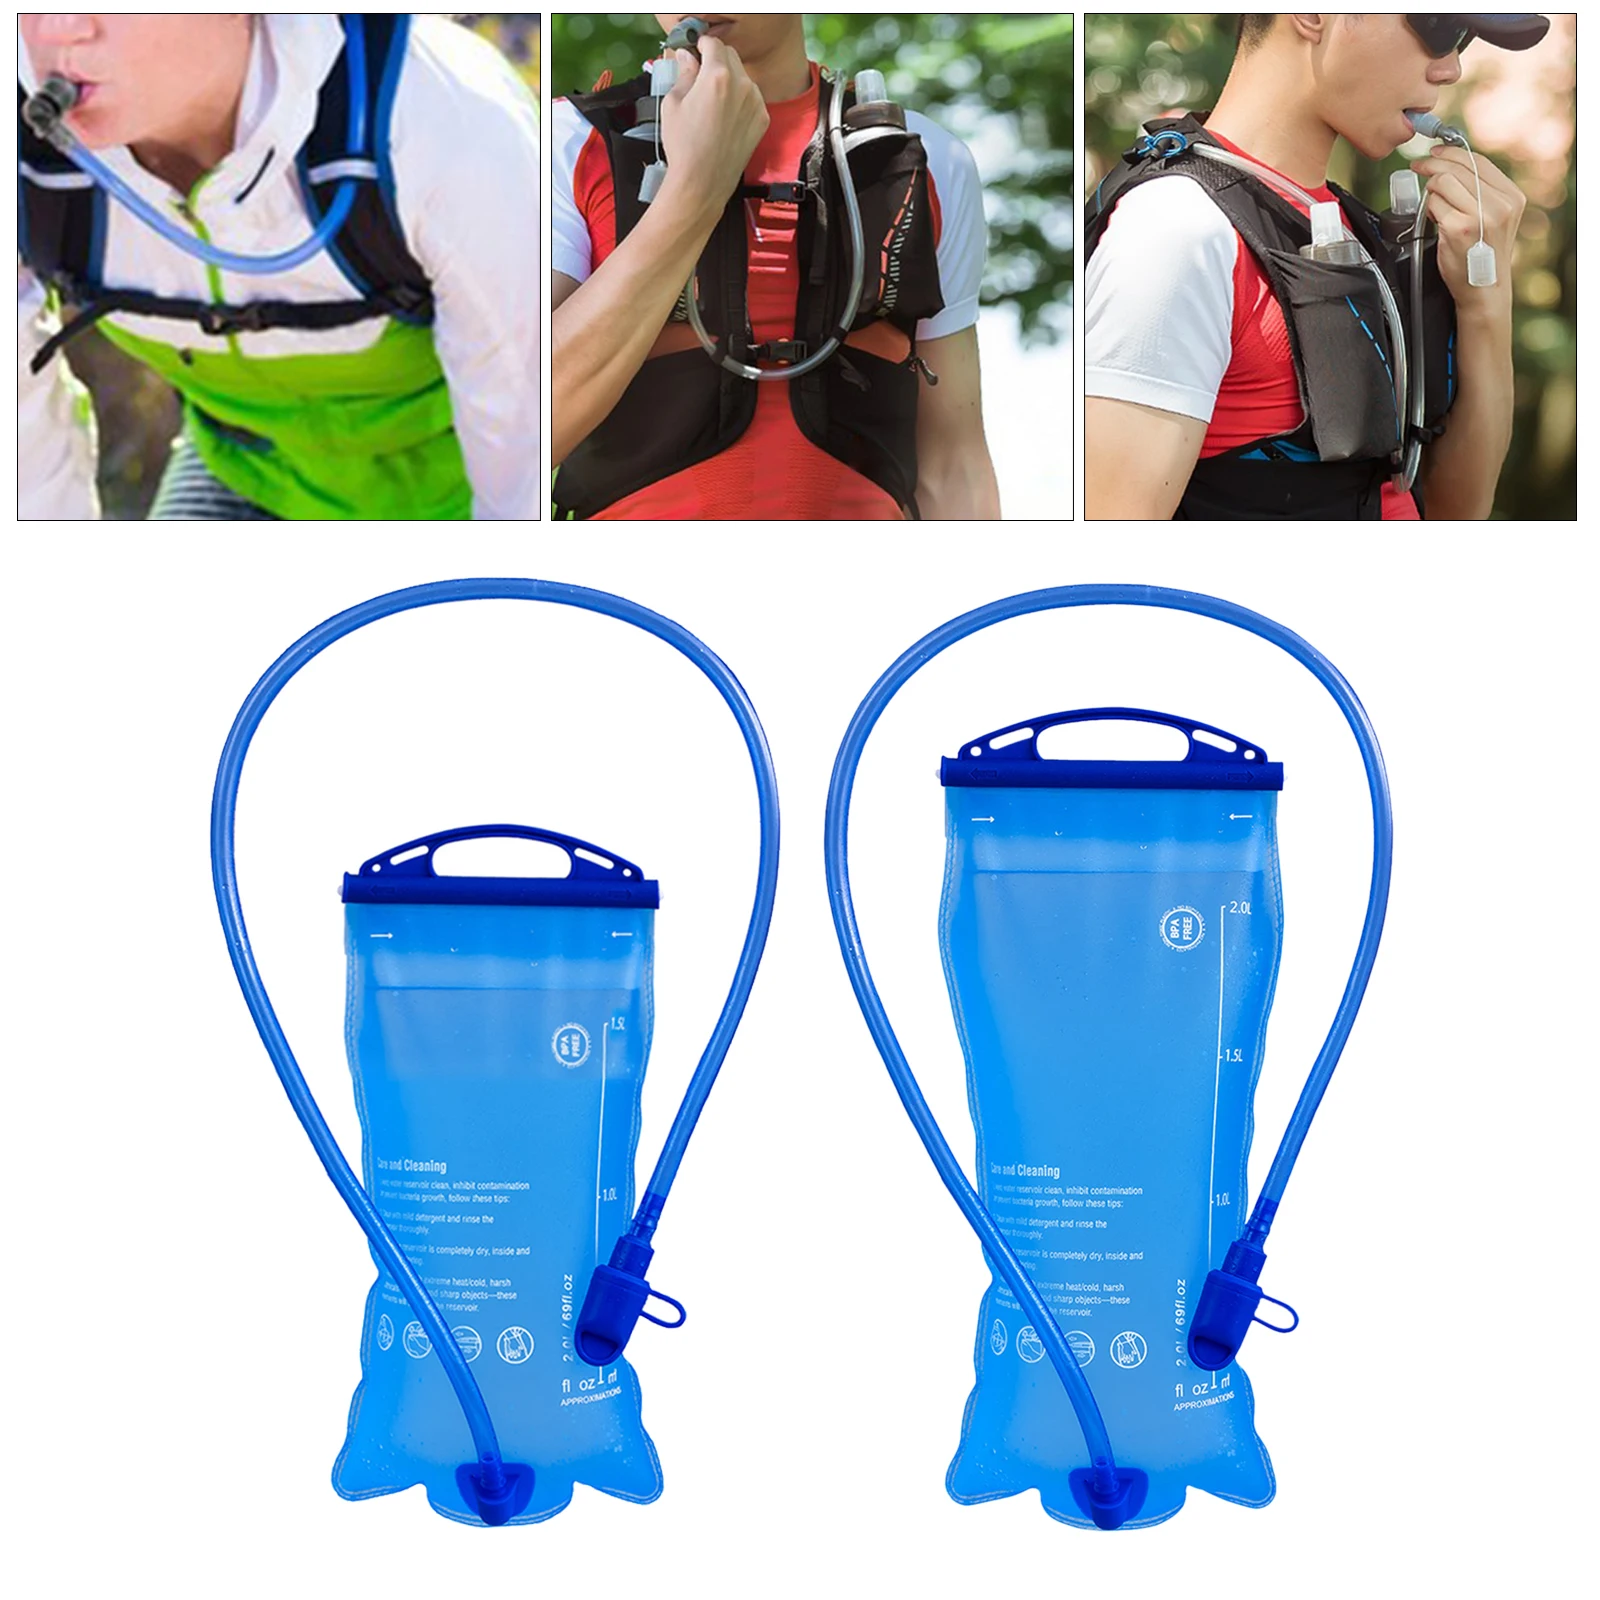 1.5-2L BPA Free Hydration Bladder Water Reservoir Storage Bag for Bicycling Hiking Camping Backpack Running Outdoor Sports